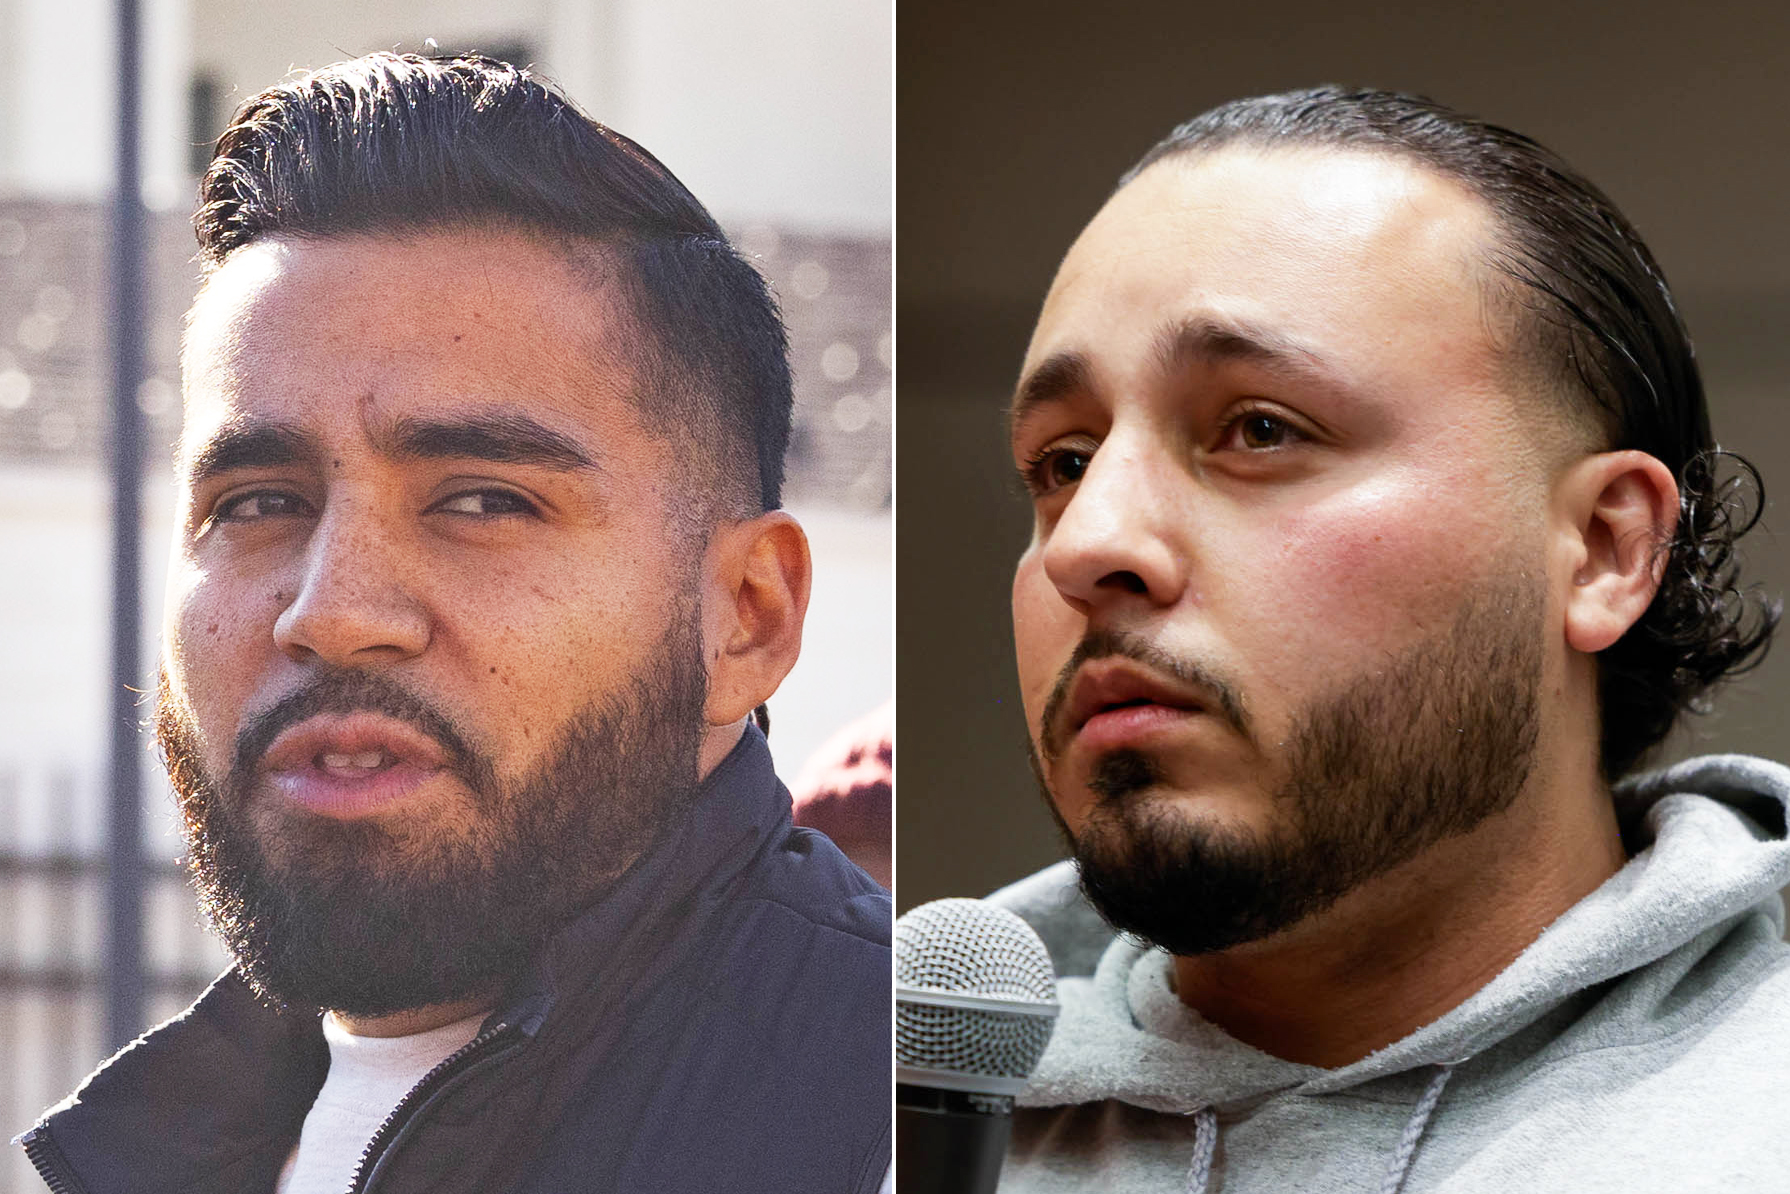 Side-by-side images of Jon Jacobo and Kevin Ortiz with similar features, both with short hair, beards, and serious expressions.